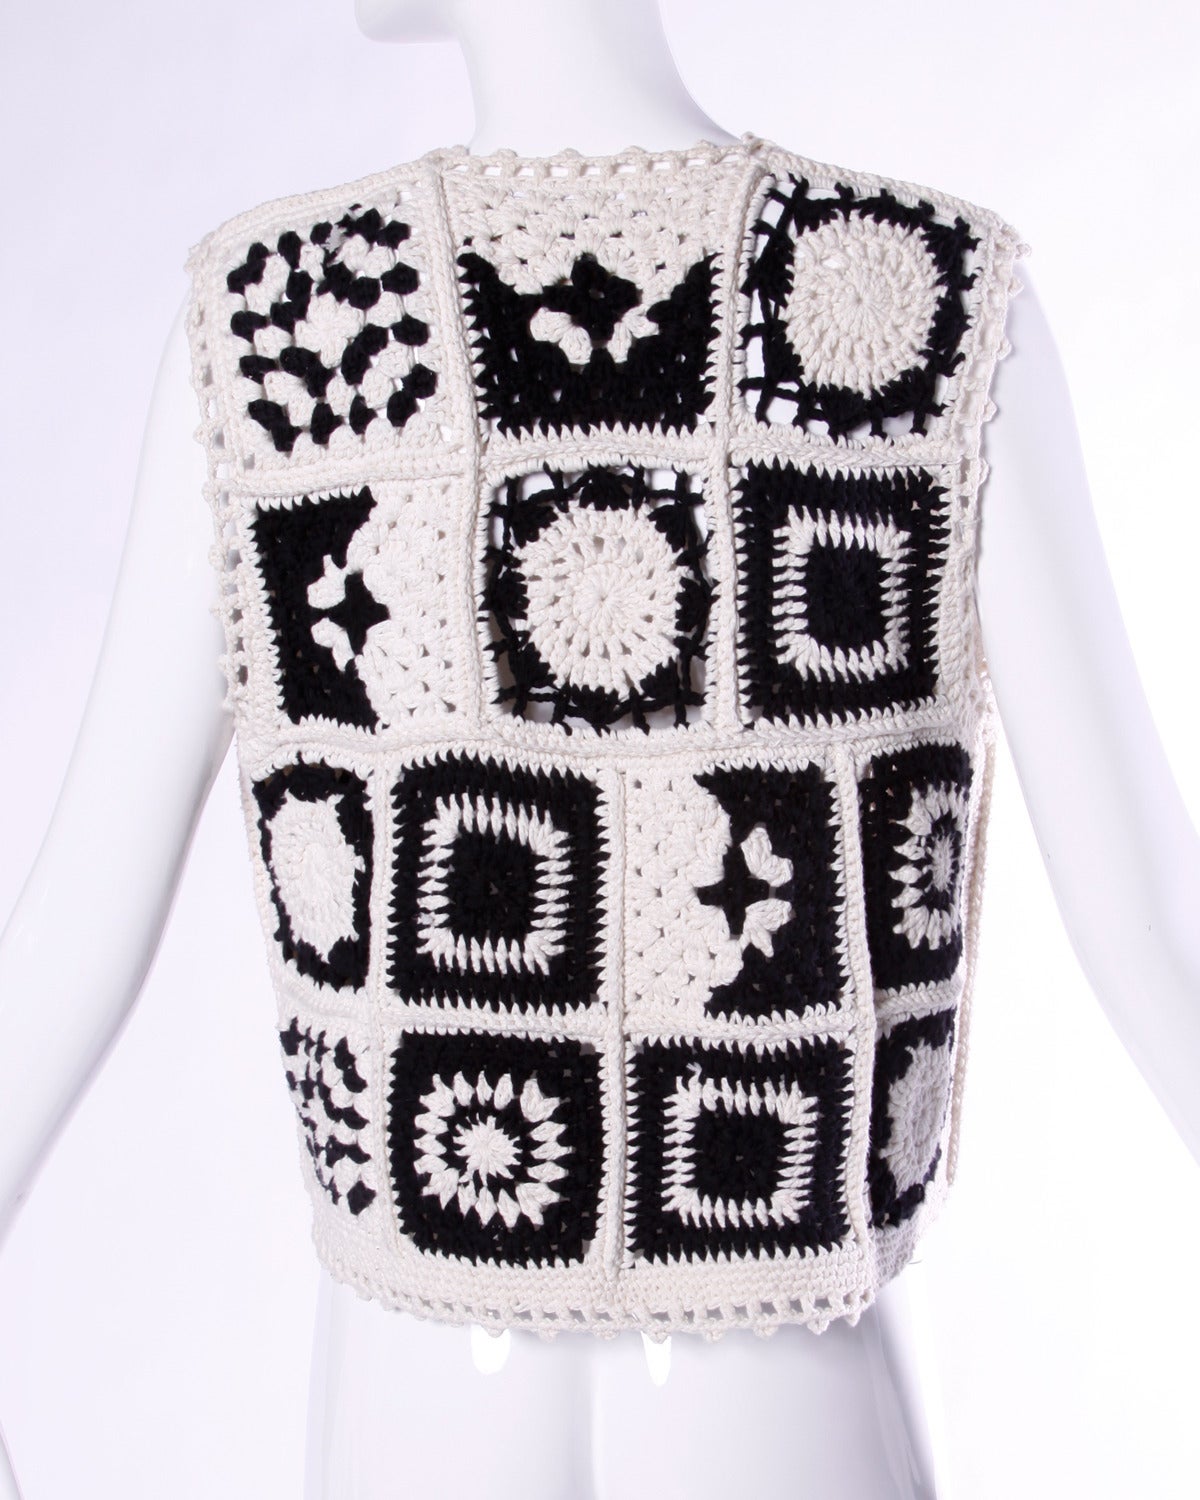 Women's Moschino Couture! Vintage Crochet Granny Squares Top or Vest, 1990s 